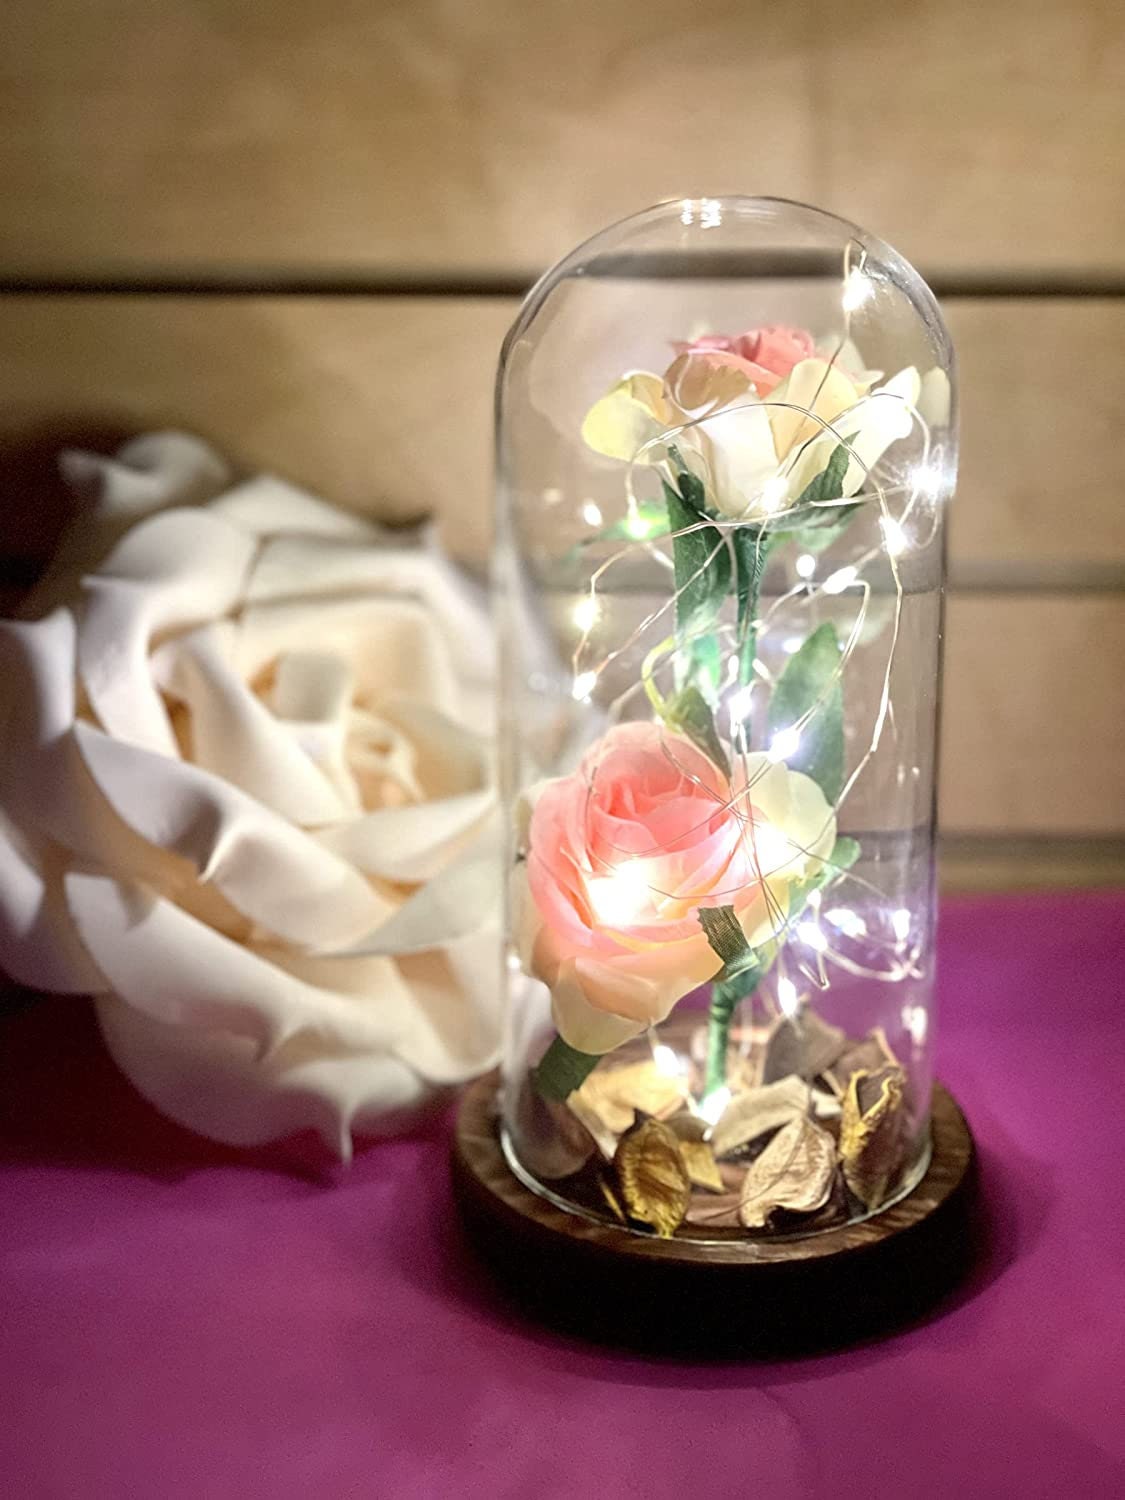 AGGUT Beauty and The Beast Rose Flowers,Womens Gifts for  Christmas,Artificial Flower Gift Romantic Red Silk Rose, Flower in Glass  Dome Women Gifts for